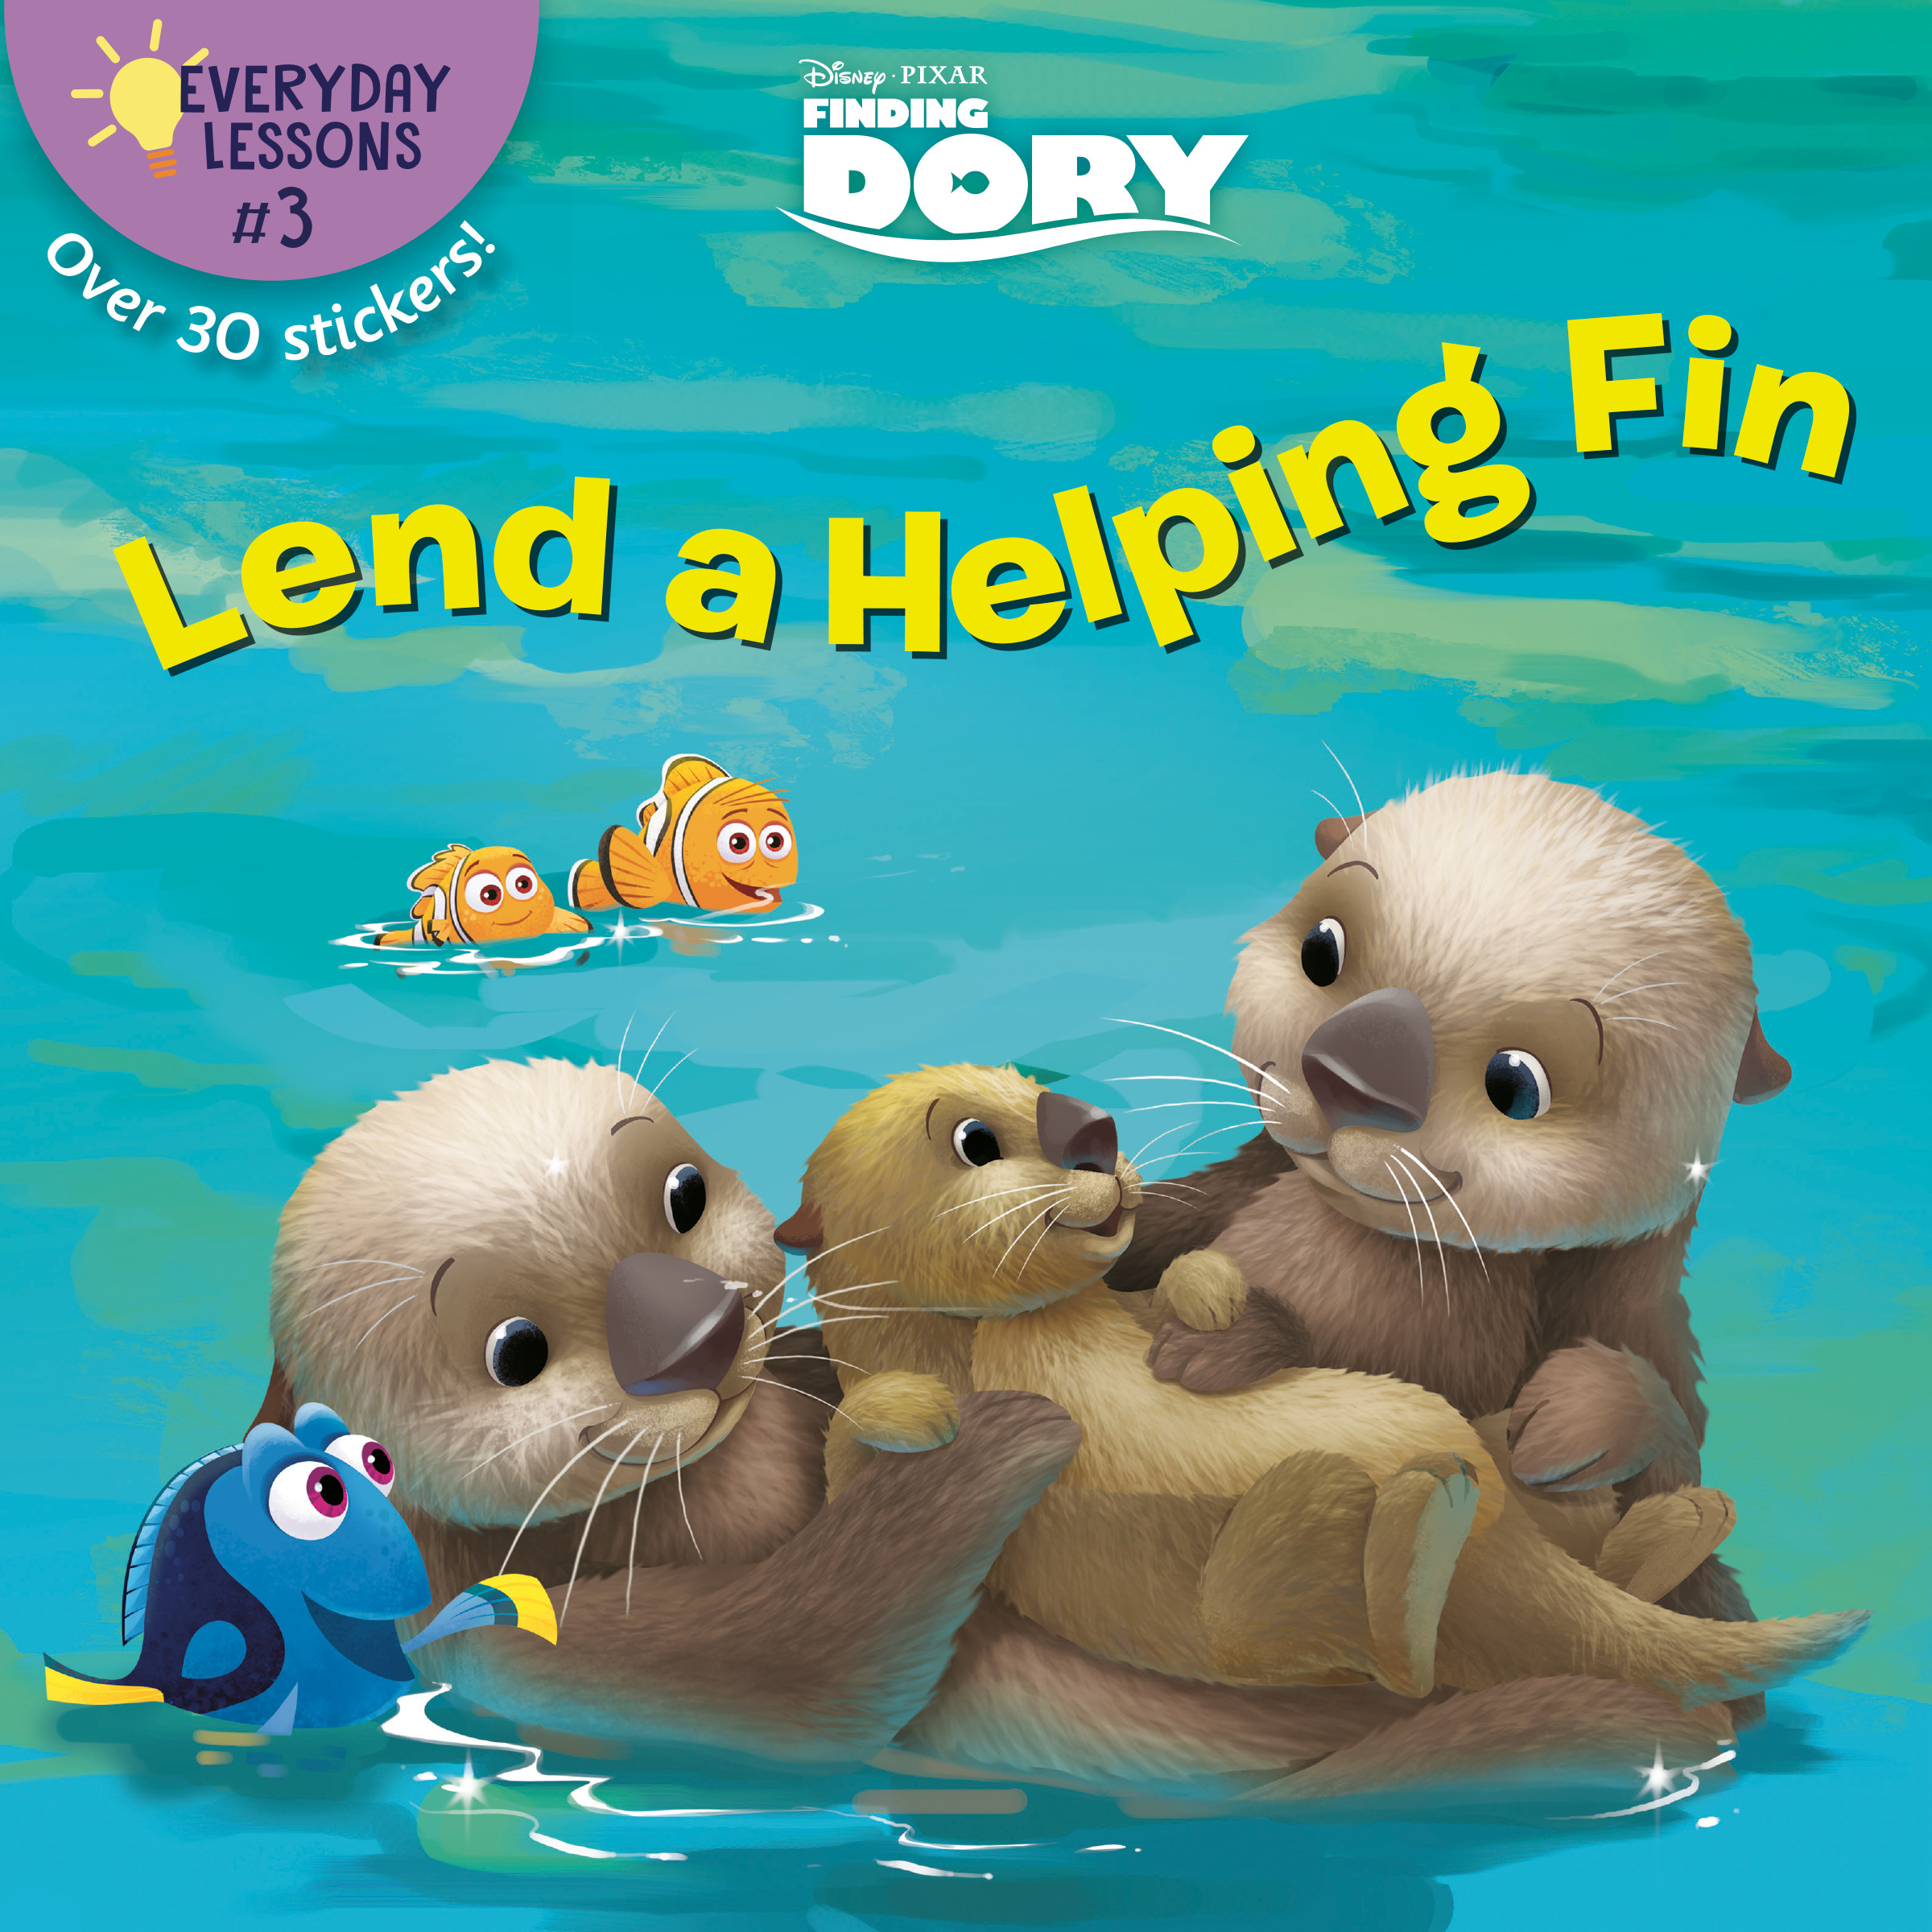 Everyday Lessons #3: Lend a Helping Fin (Disney/Pixar Finding Dory) | Sycamore, Beth